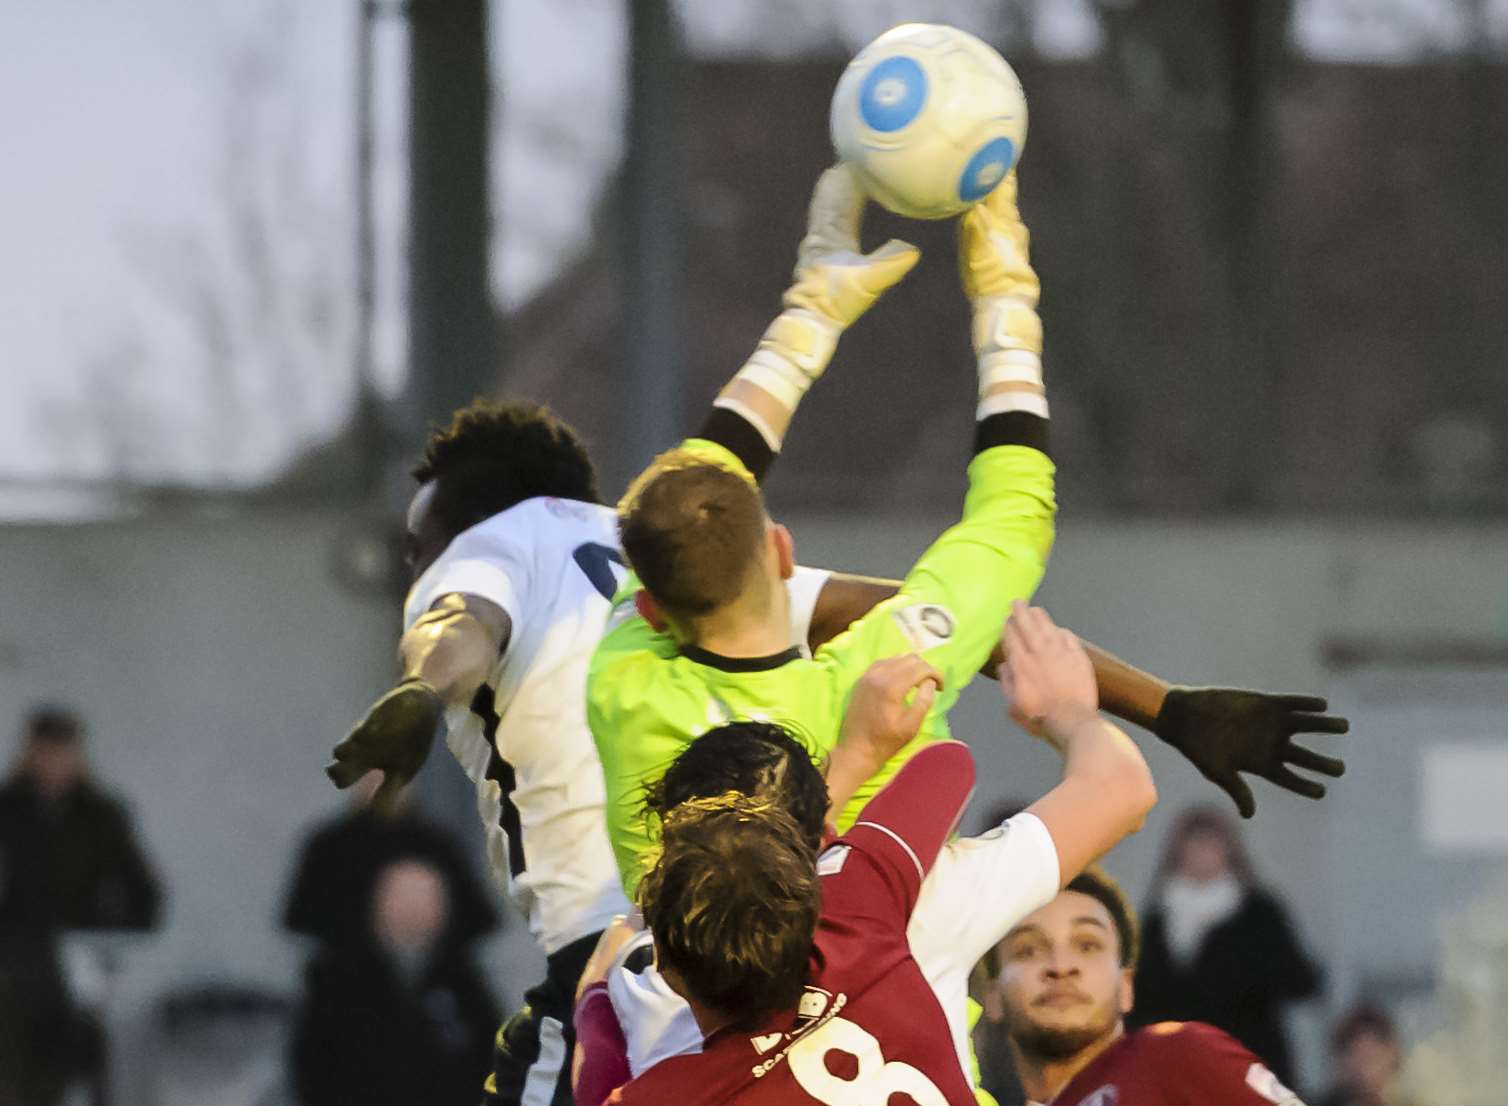 Duane Ofori-Acheampong puts Chelmsford keeper Ross Fitzsimons under pressure Pic Andy Payton